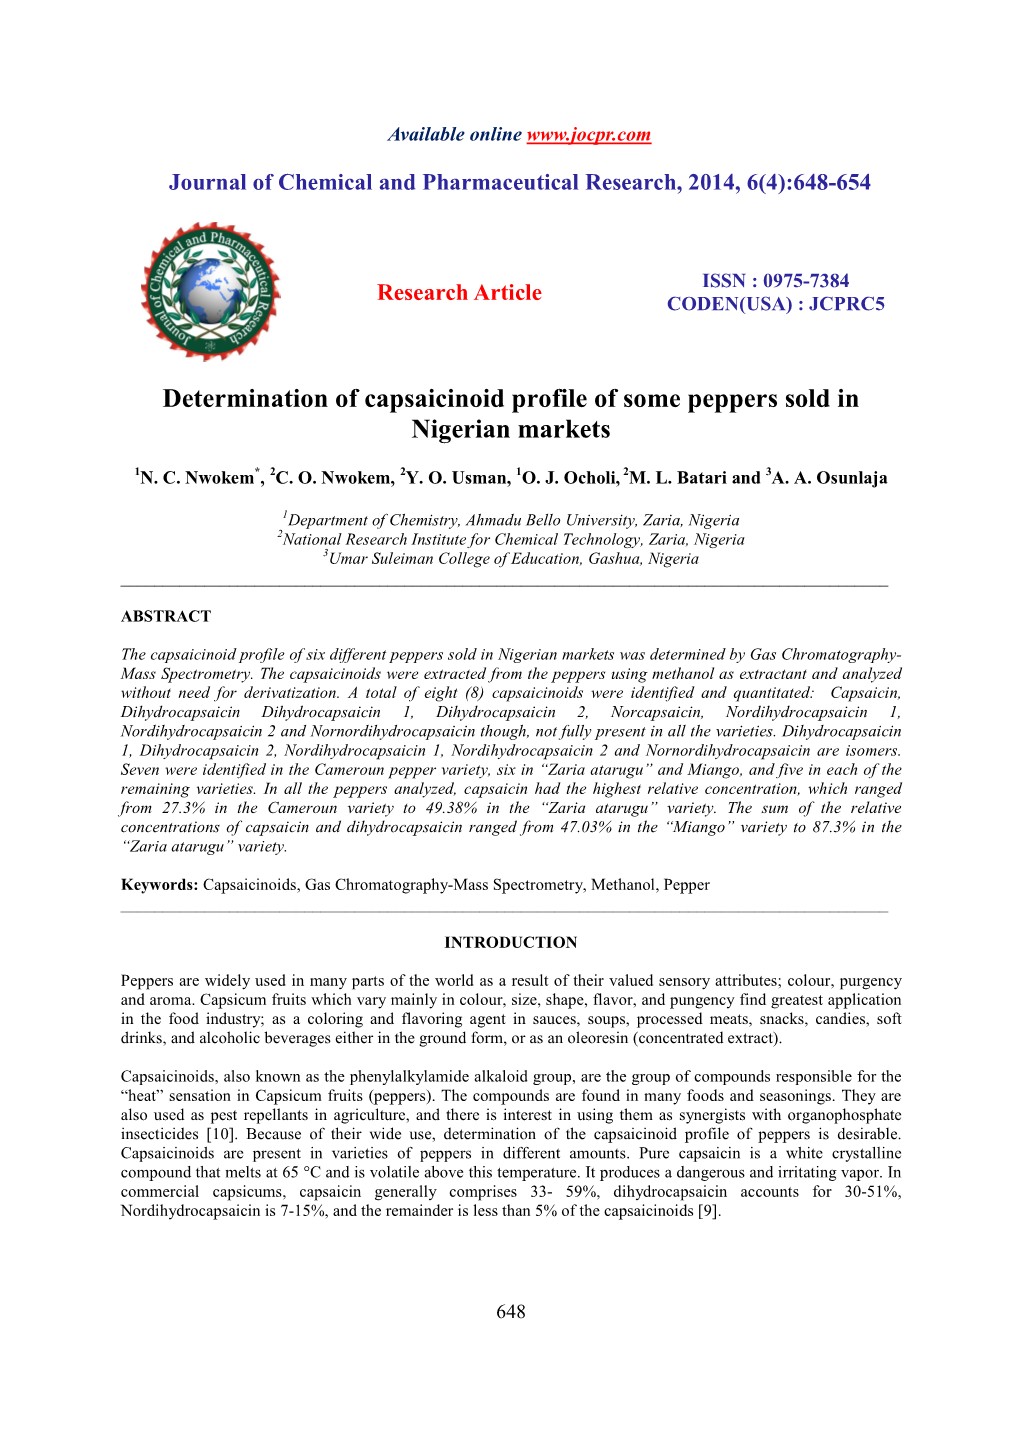 Determination of Capsaicinoid Profile of Some Peppers Sold in Nigerian Markets